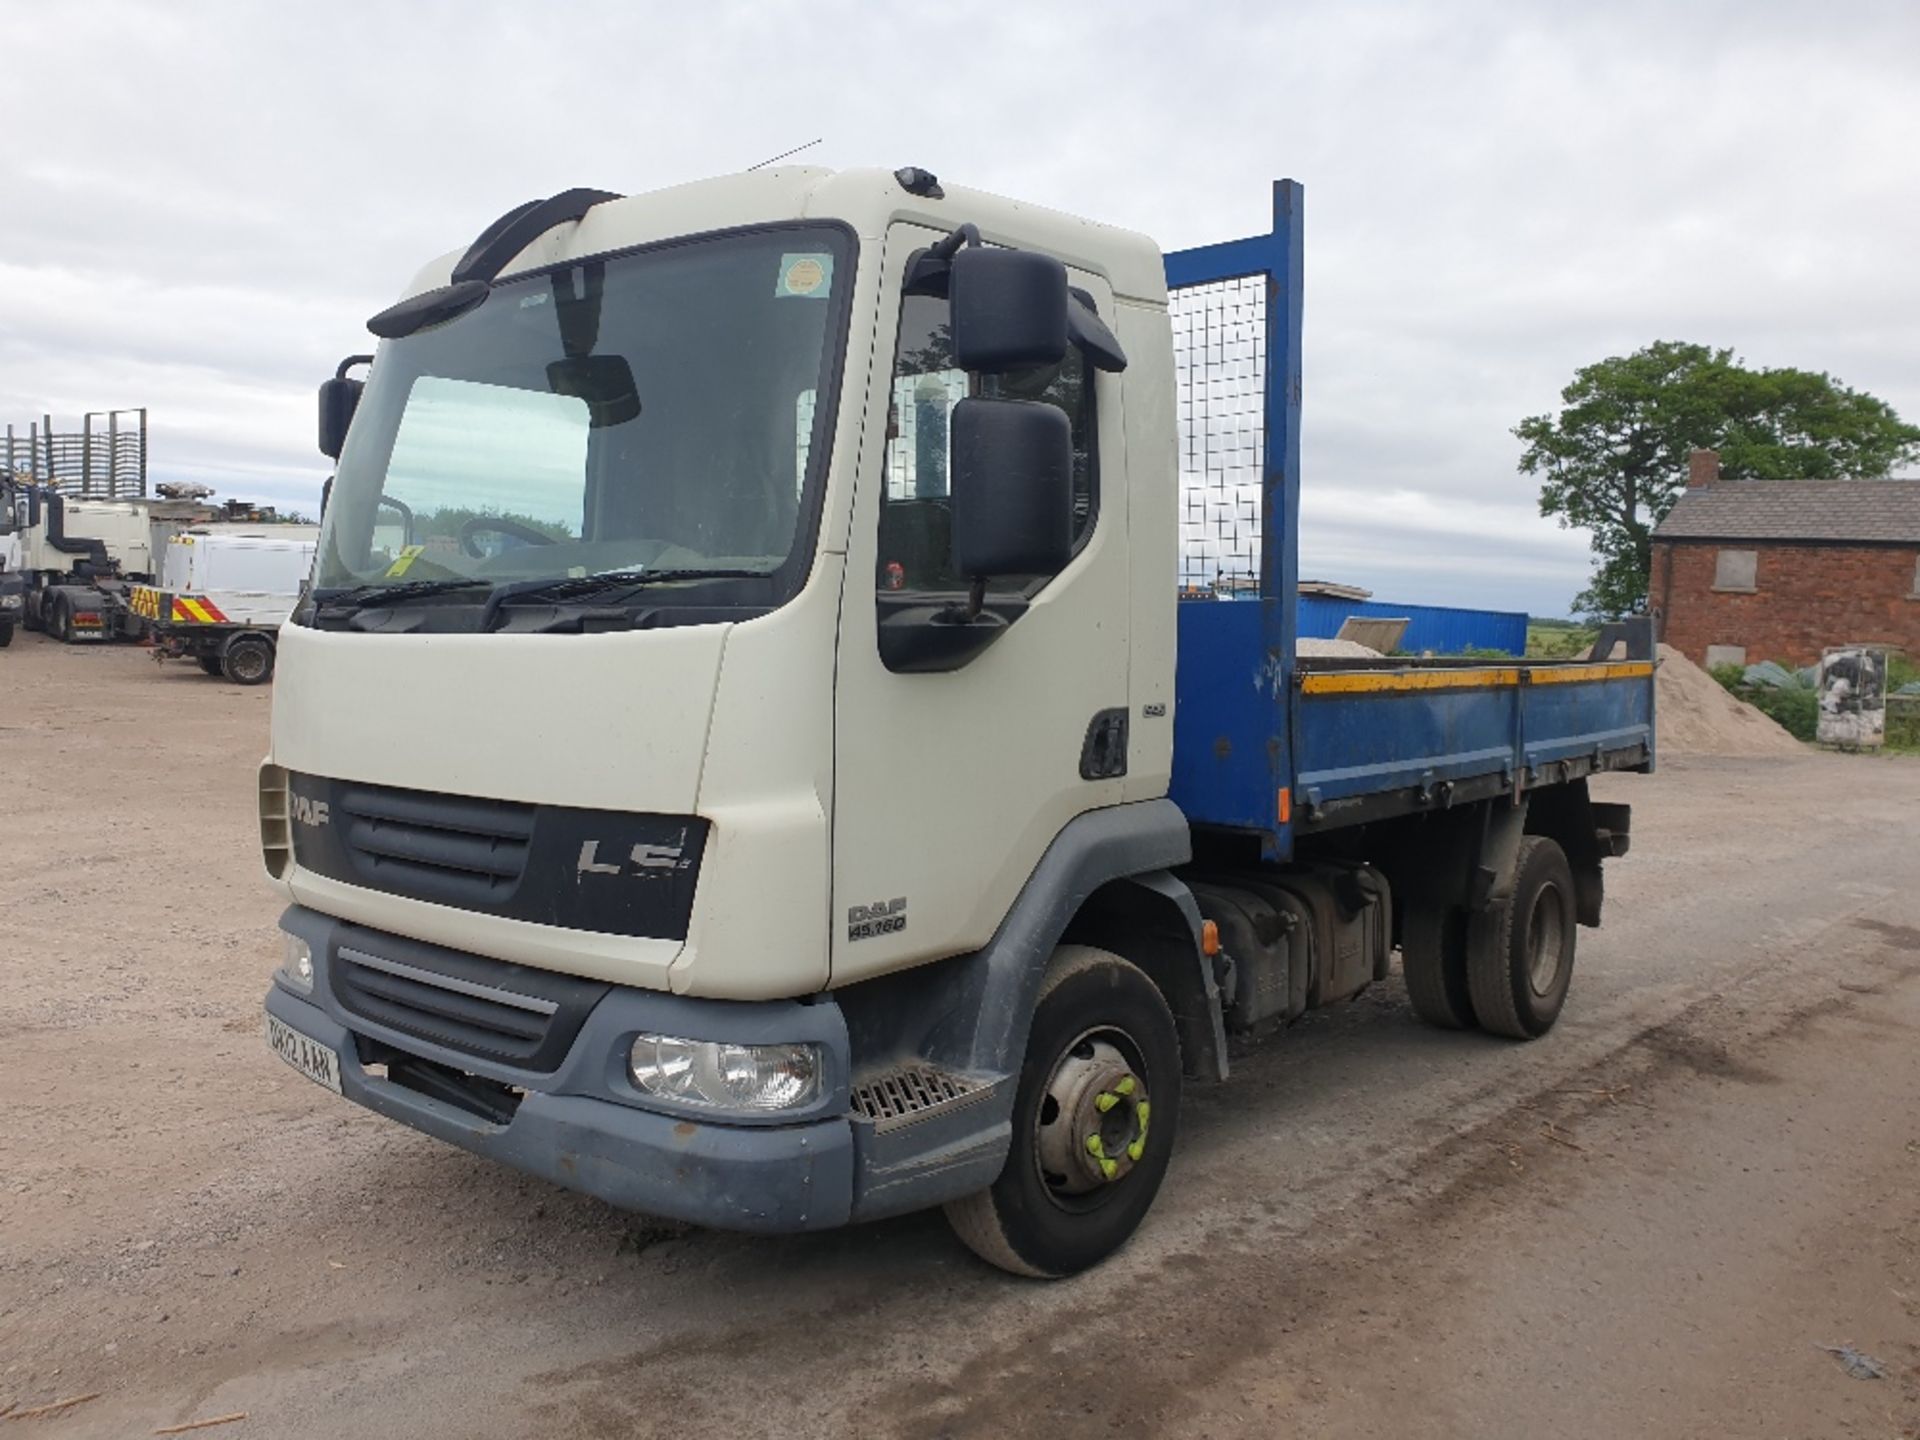 DAF LF FA 45.160 Ti with Brit-Tipp tipper body DX12 AAN - Image 3 of 10